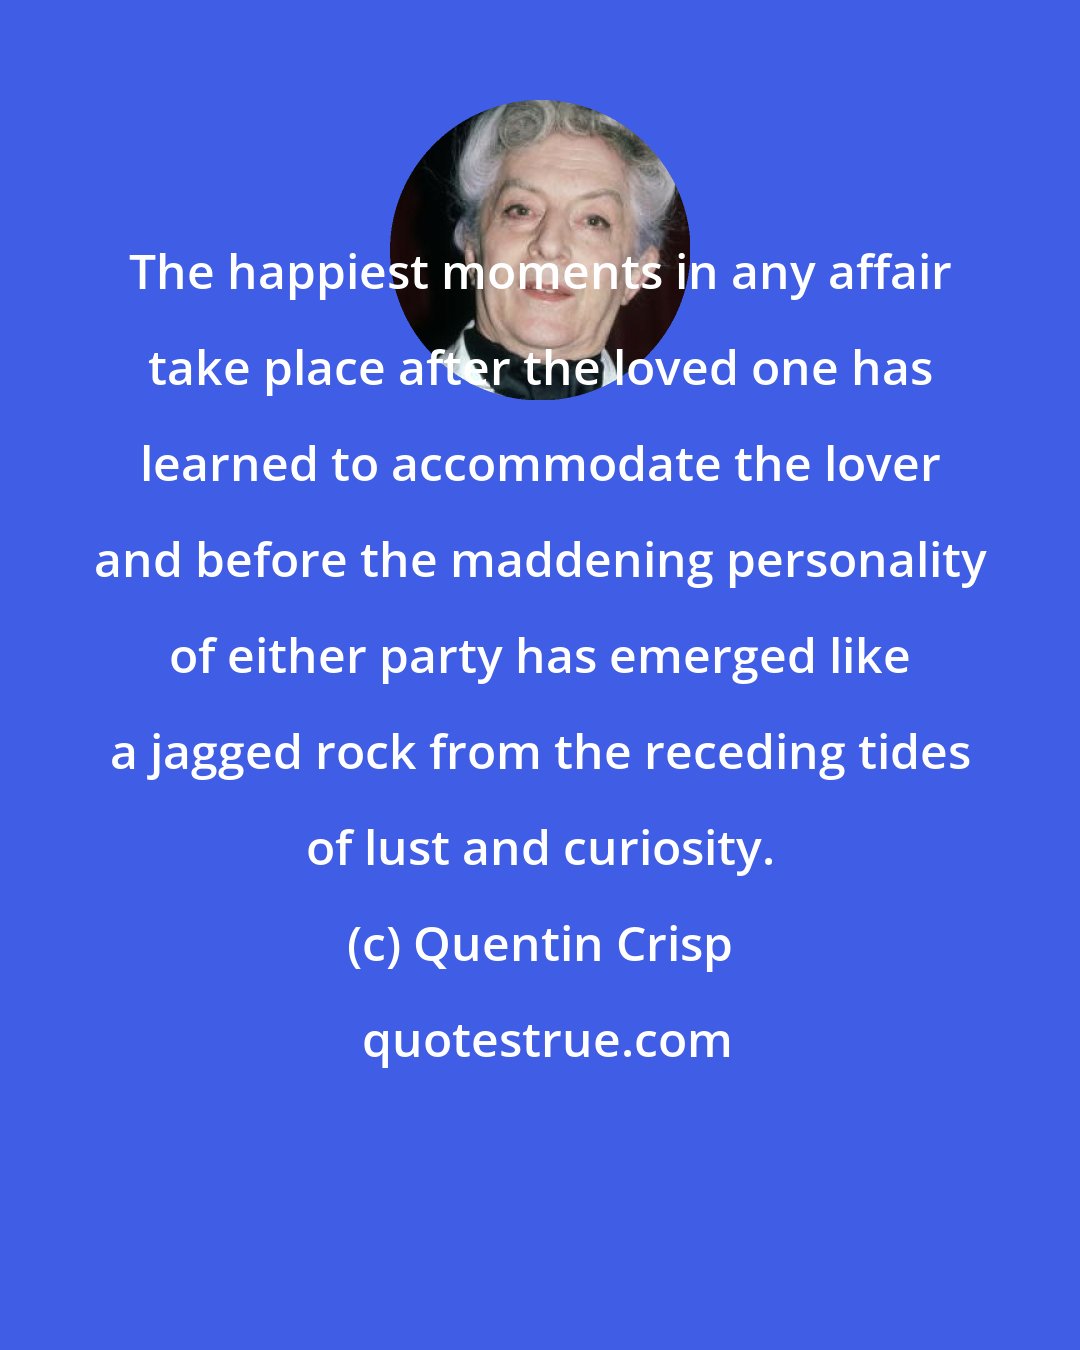 Quentin Crisp: The happiest moments in any affair take place after the loved one has learned to accommodate the lover and before the maddening personality of either party has emerged like a jagged rock from the receding tides of lust and curiosity.